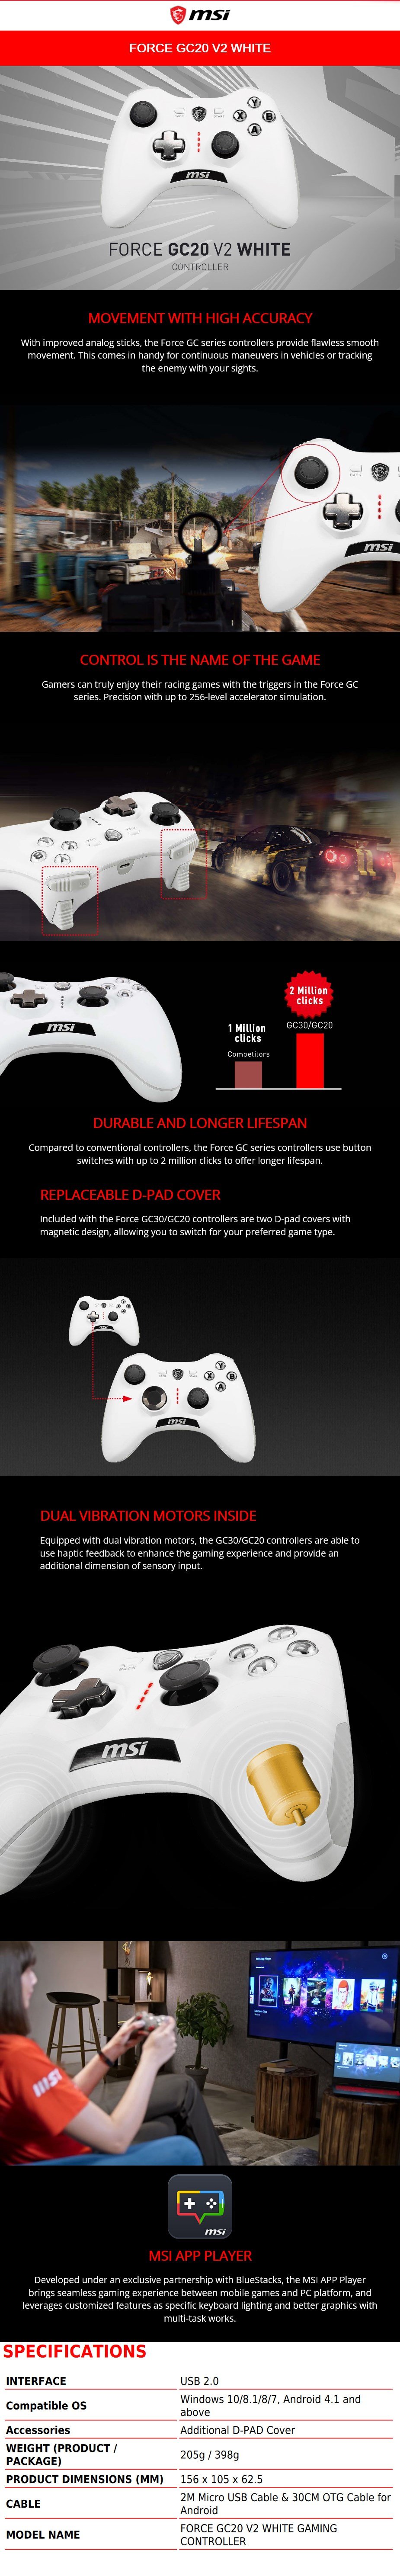 A large marketing image providing additional information about the product MSI Force GC20 V2 Wired Controller White - Additional alt info not provided